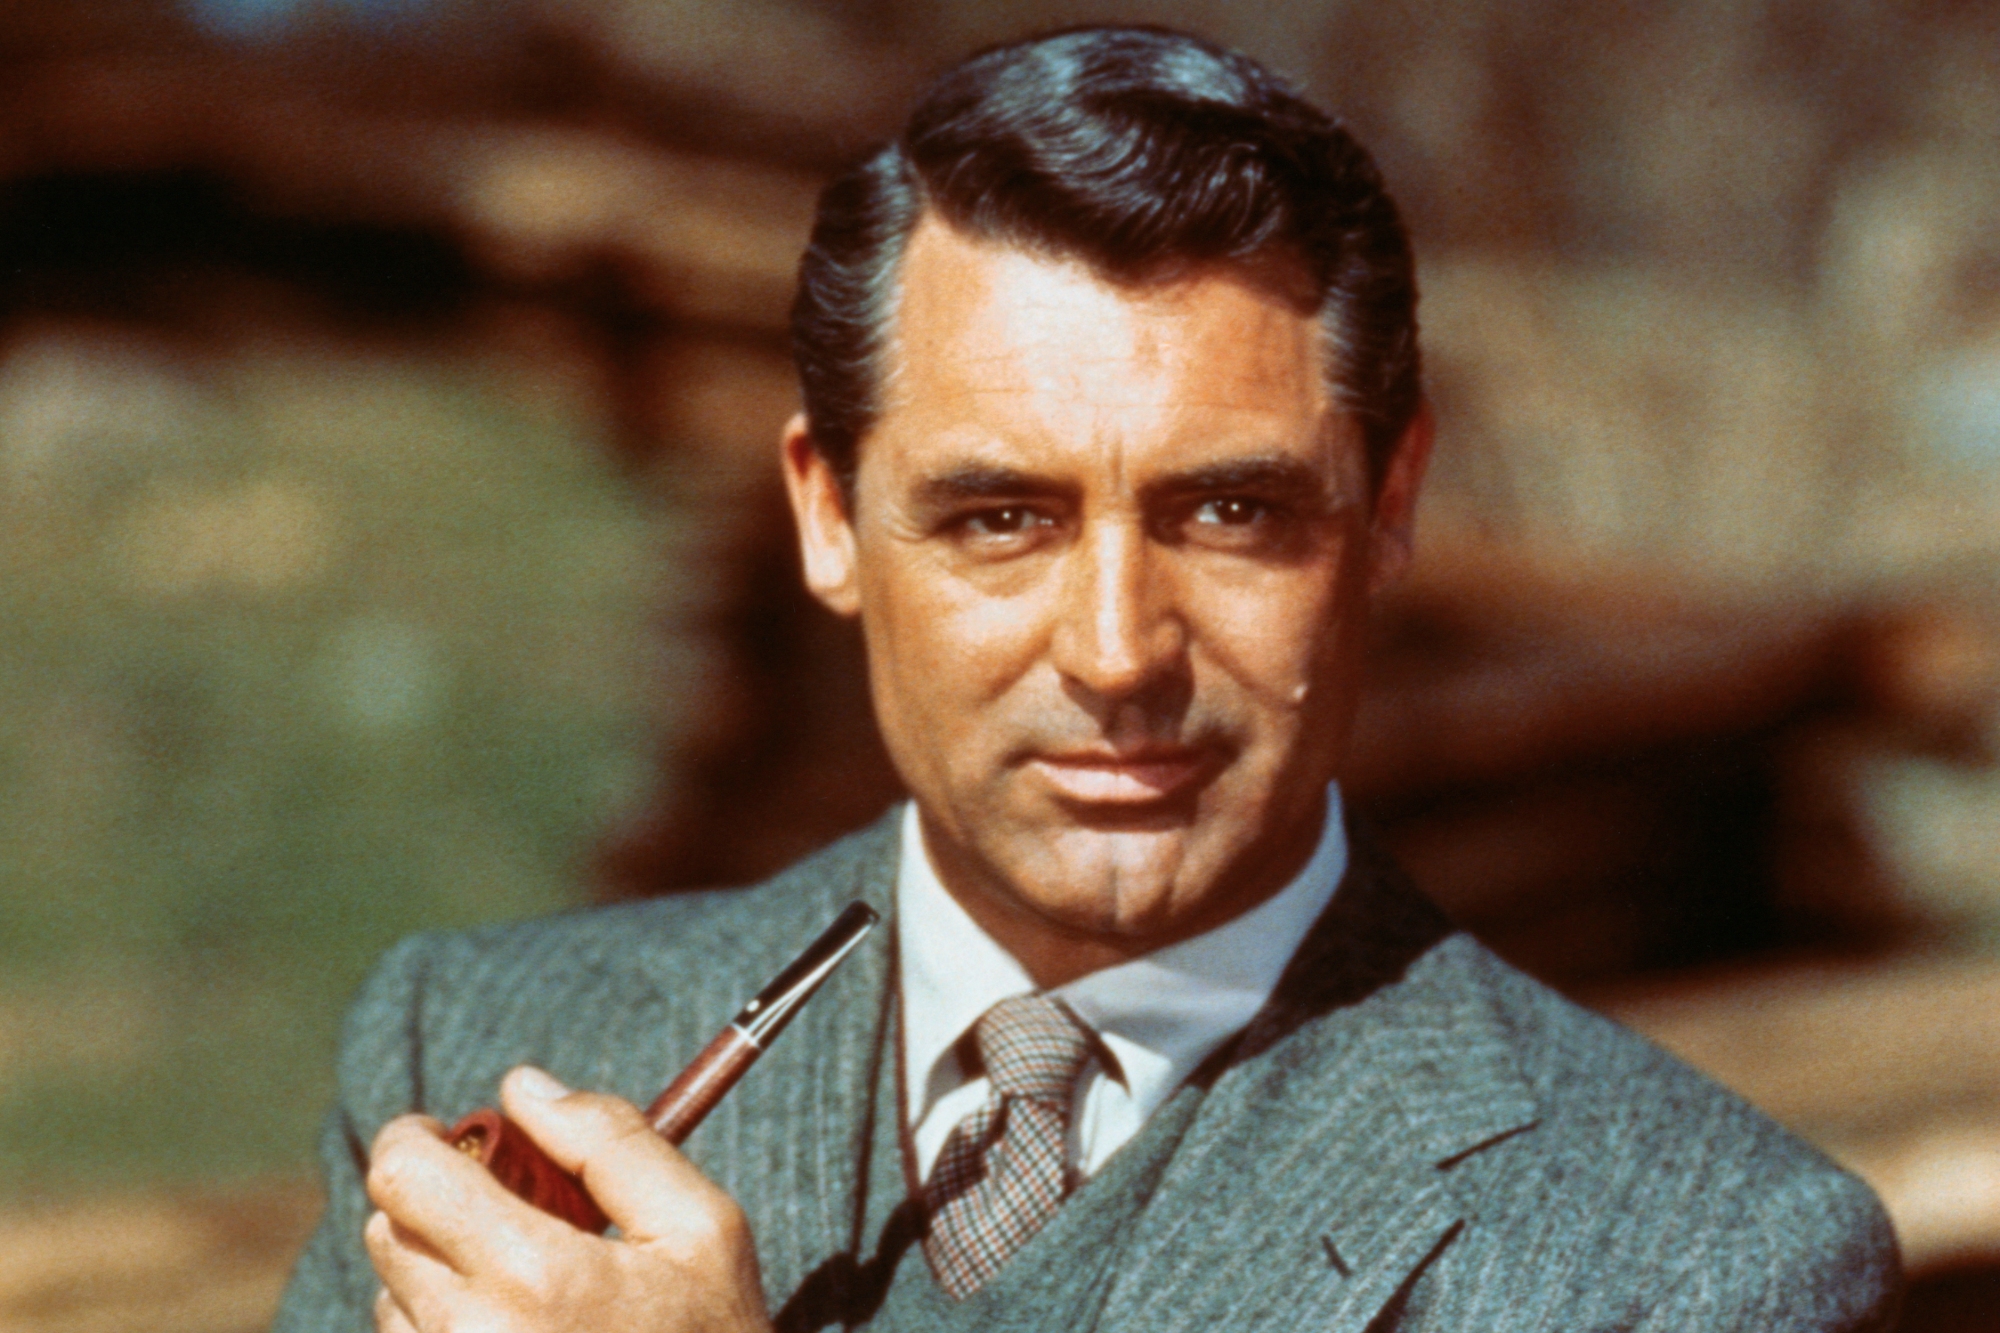 Cary Grant, who turned down 'My Fair Lady'. He's wearing a grey suit with a slight smile, holding a pipe.